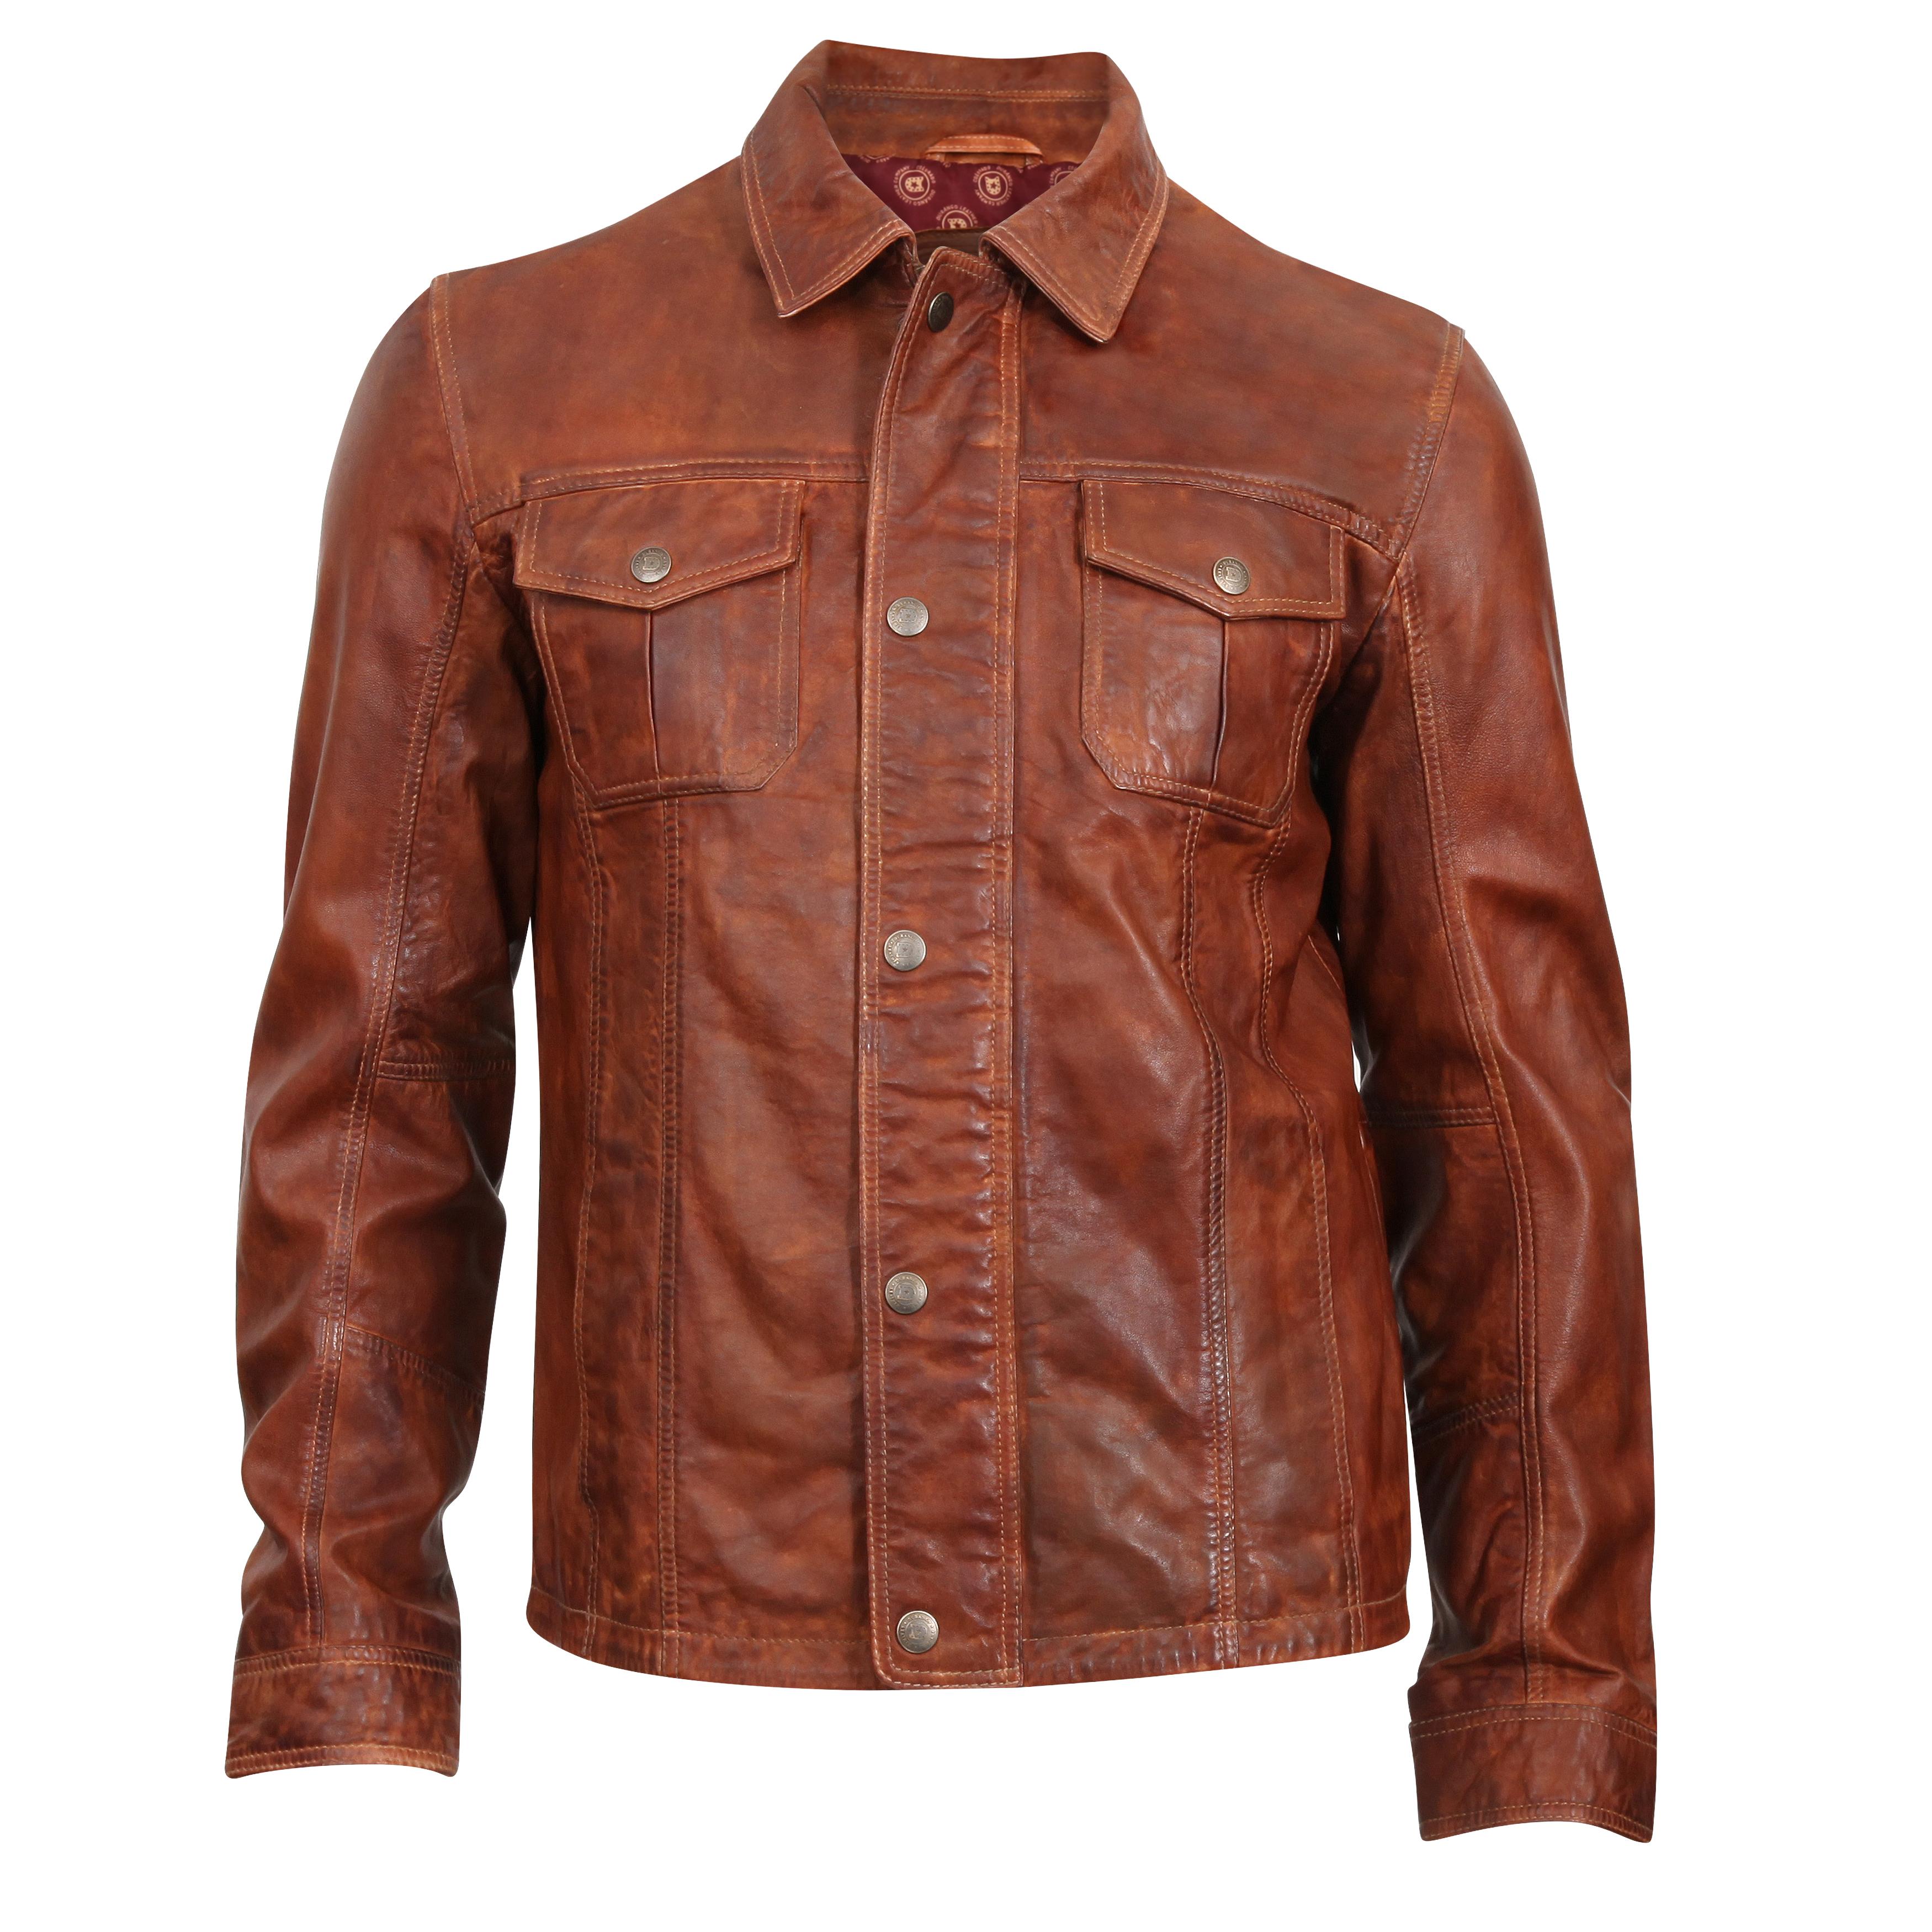 Cow Puncher Brown Jacket, Durango Leather Company DLC0048